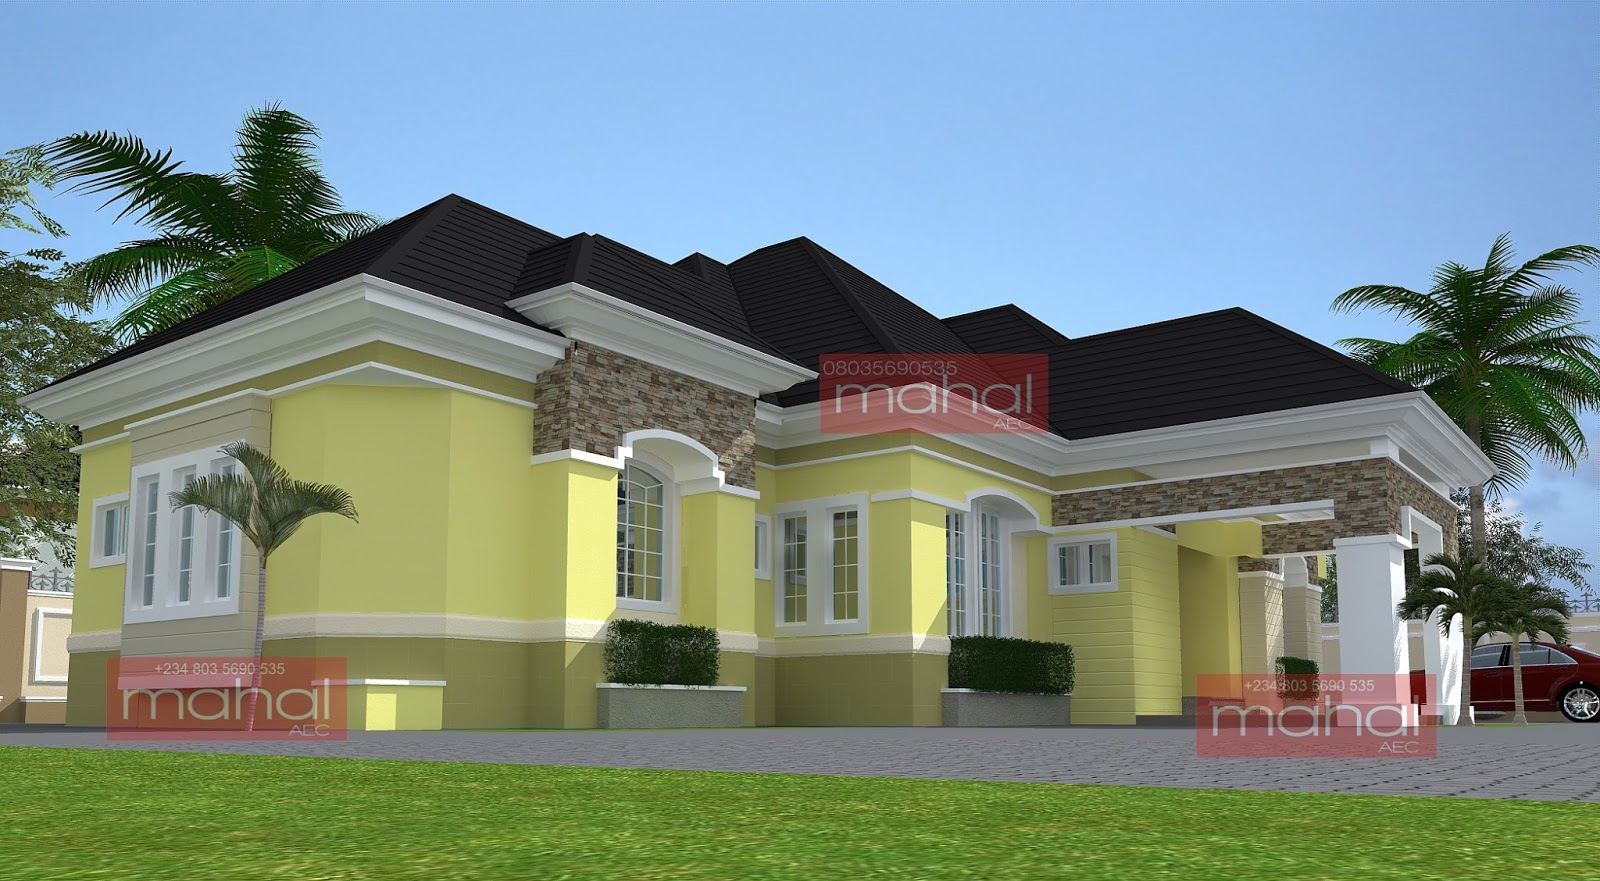 6 Bedroom  Bungalow House  Plans  In Nigeria  Zion Star